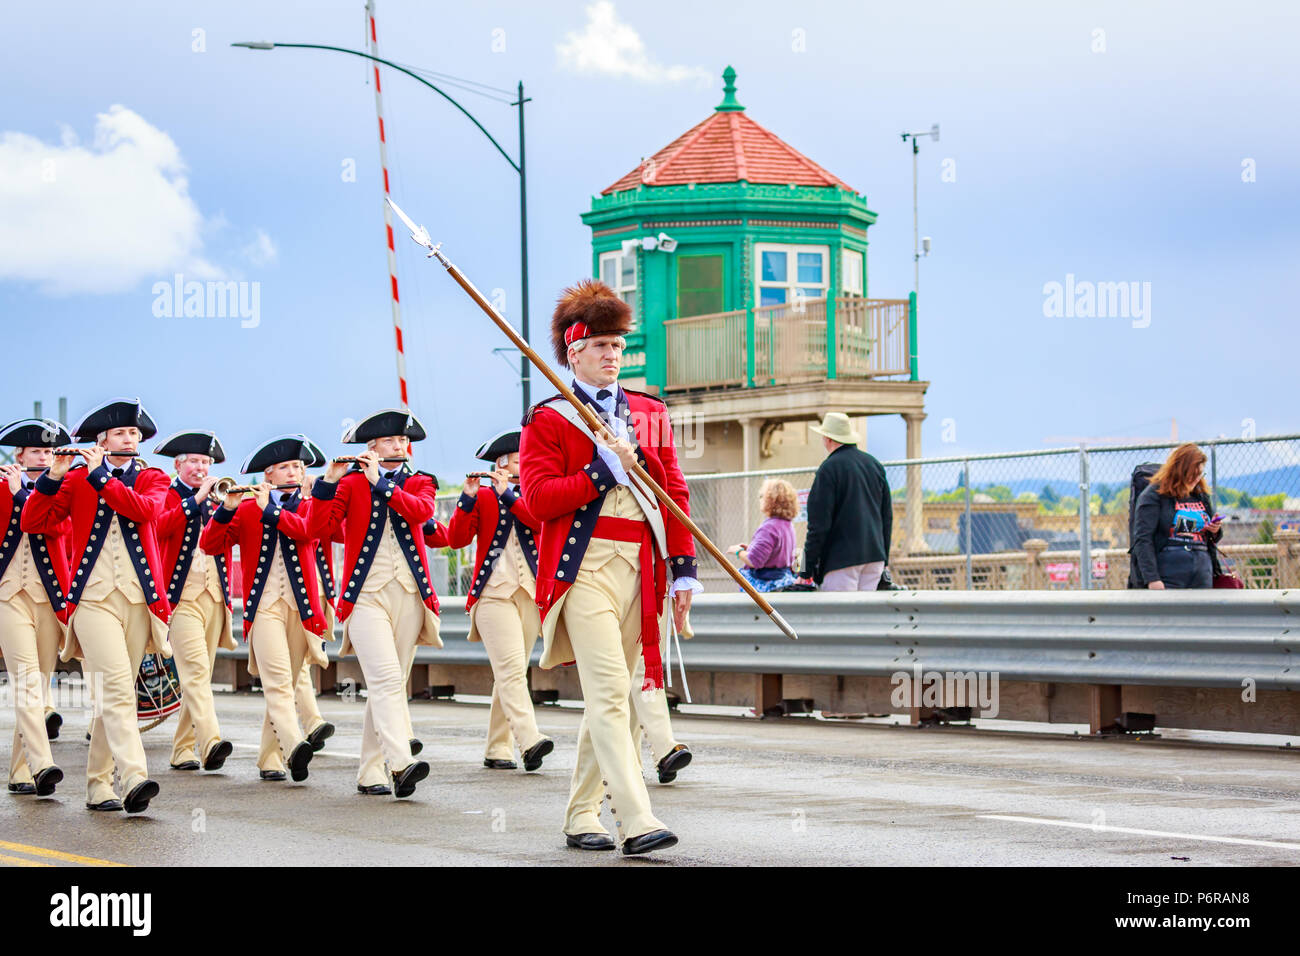 Portland, Oregon, USA - June 9, 2018: The United States Army Old Guard Fife and Drum Corps in the Grand Floral Parade, during Portland Rose Festival 2 Stock Photo